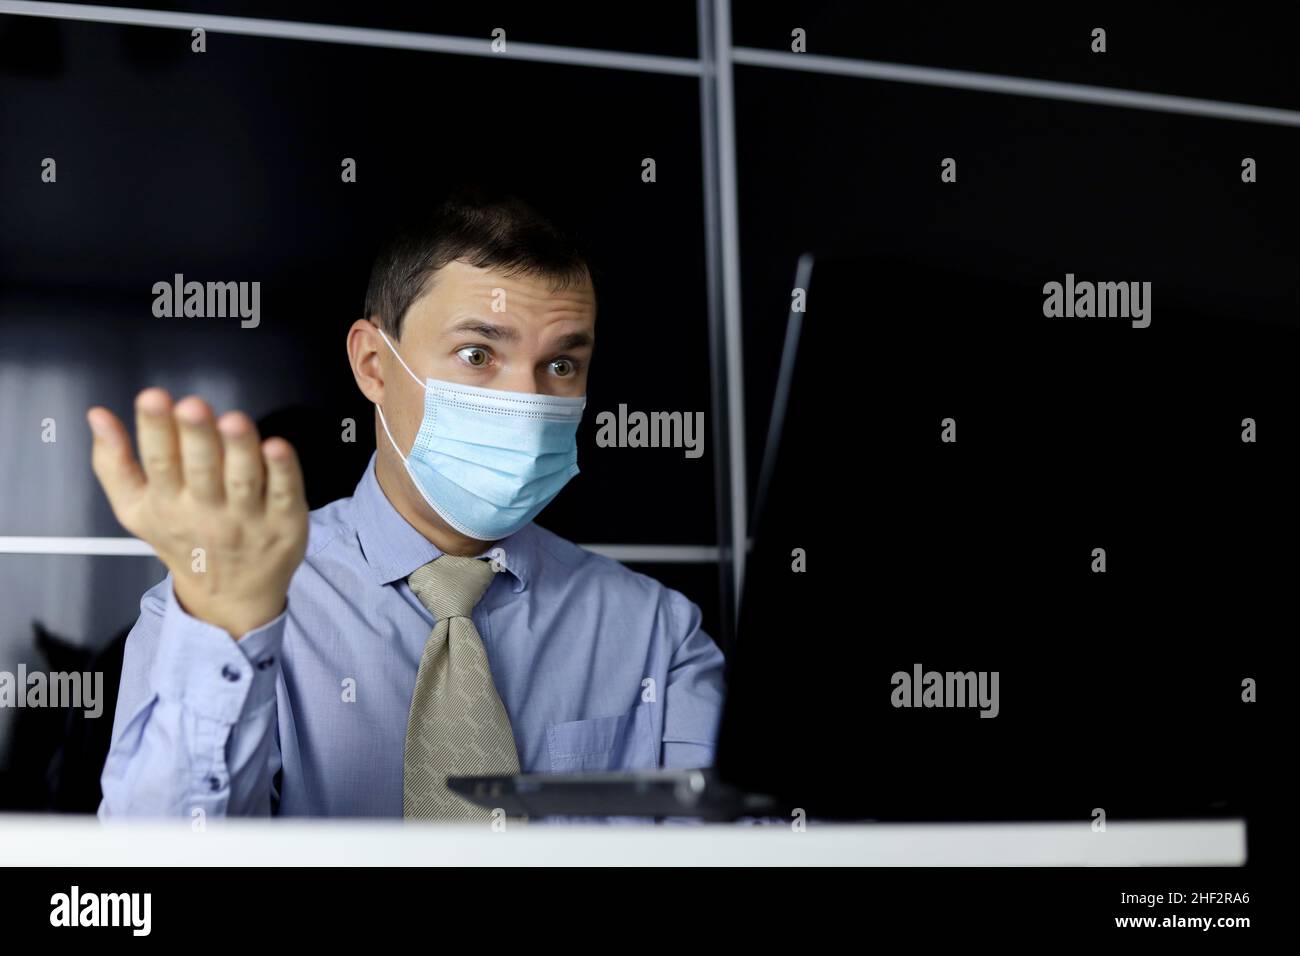 Shocked man in face mask looking at laptop display. Office worker disappointed or surprised by an unexpected error on computer device Stock Photo